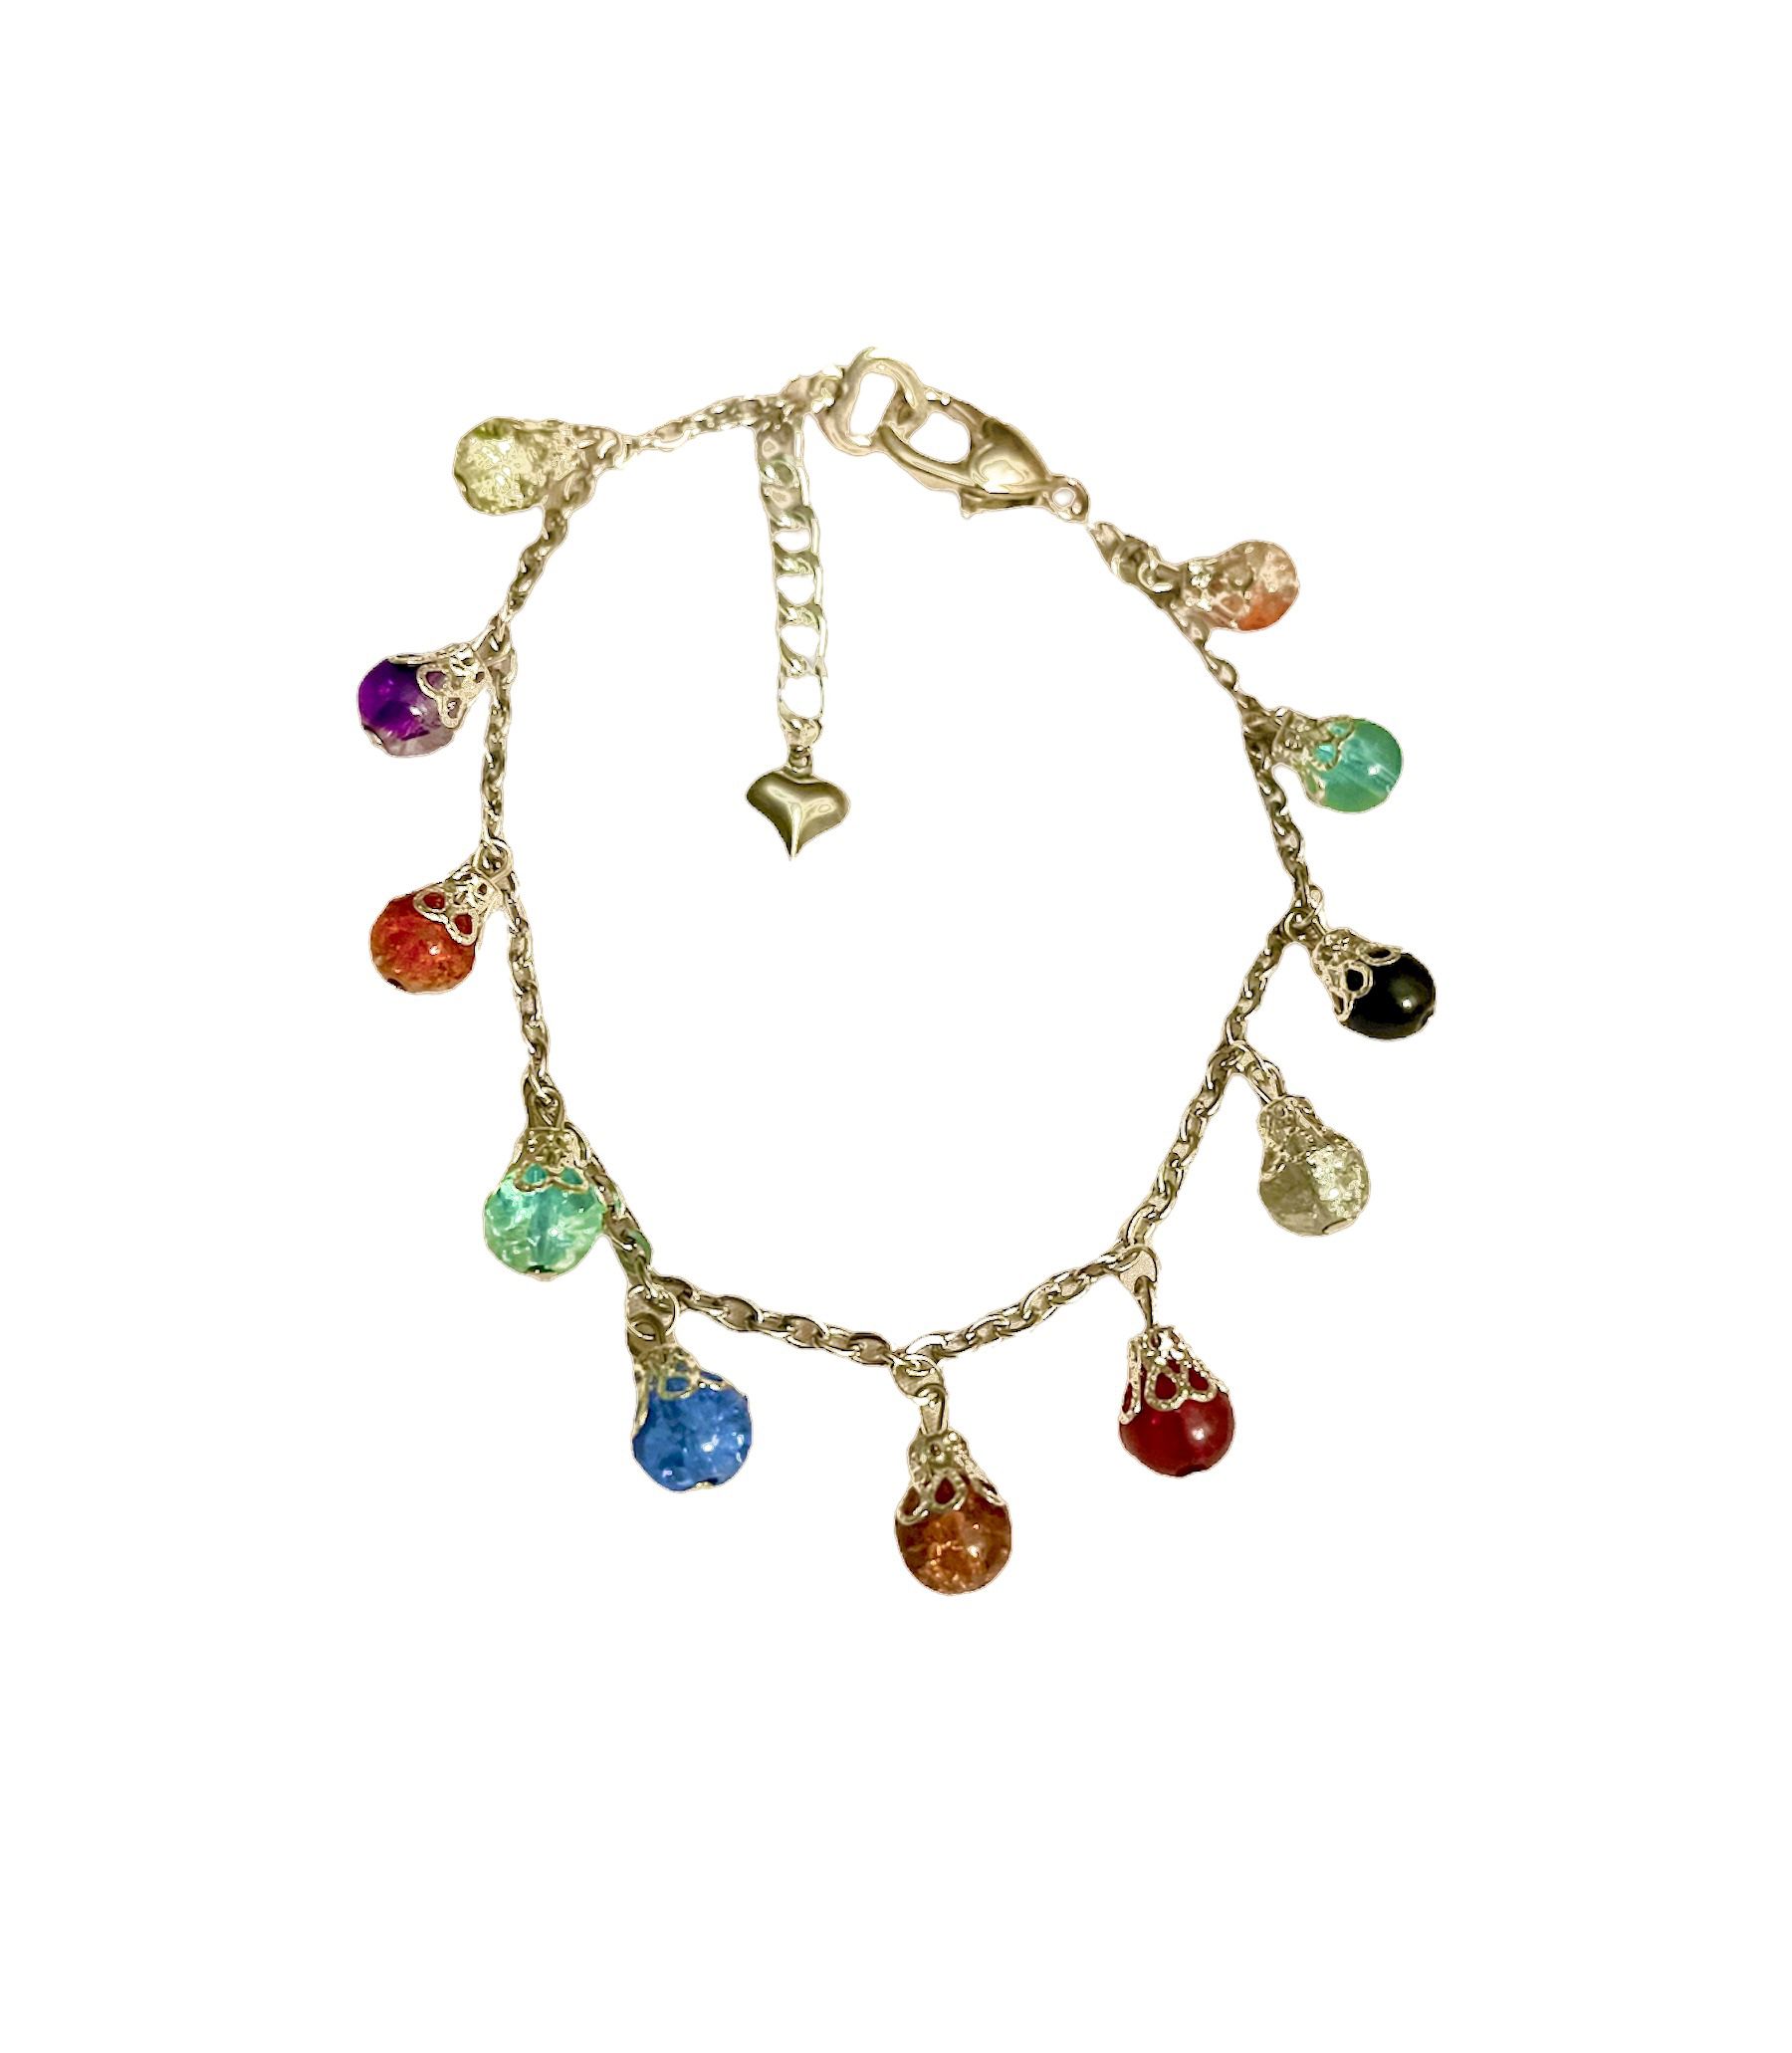 Handmade Anklet With Rainbow Beads - Silver Stainless Steel - Adjustable